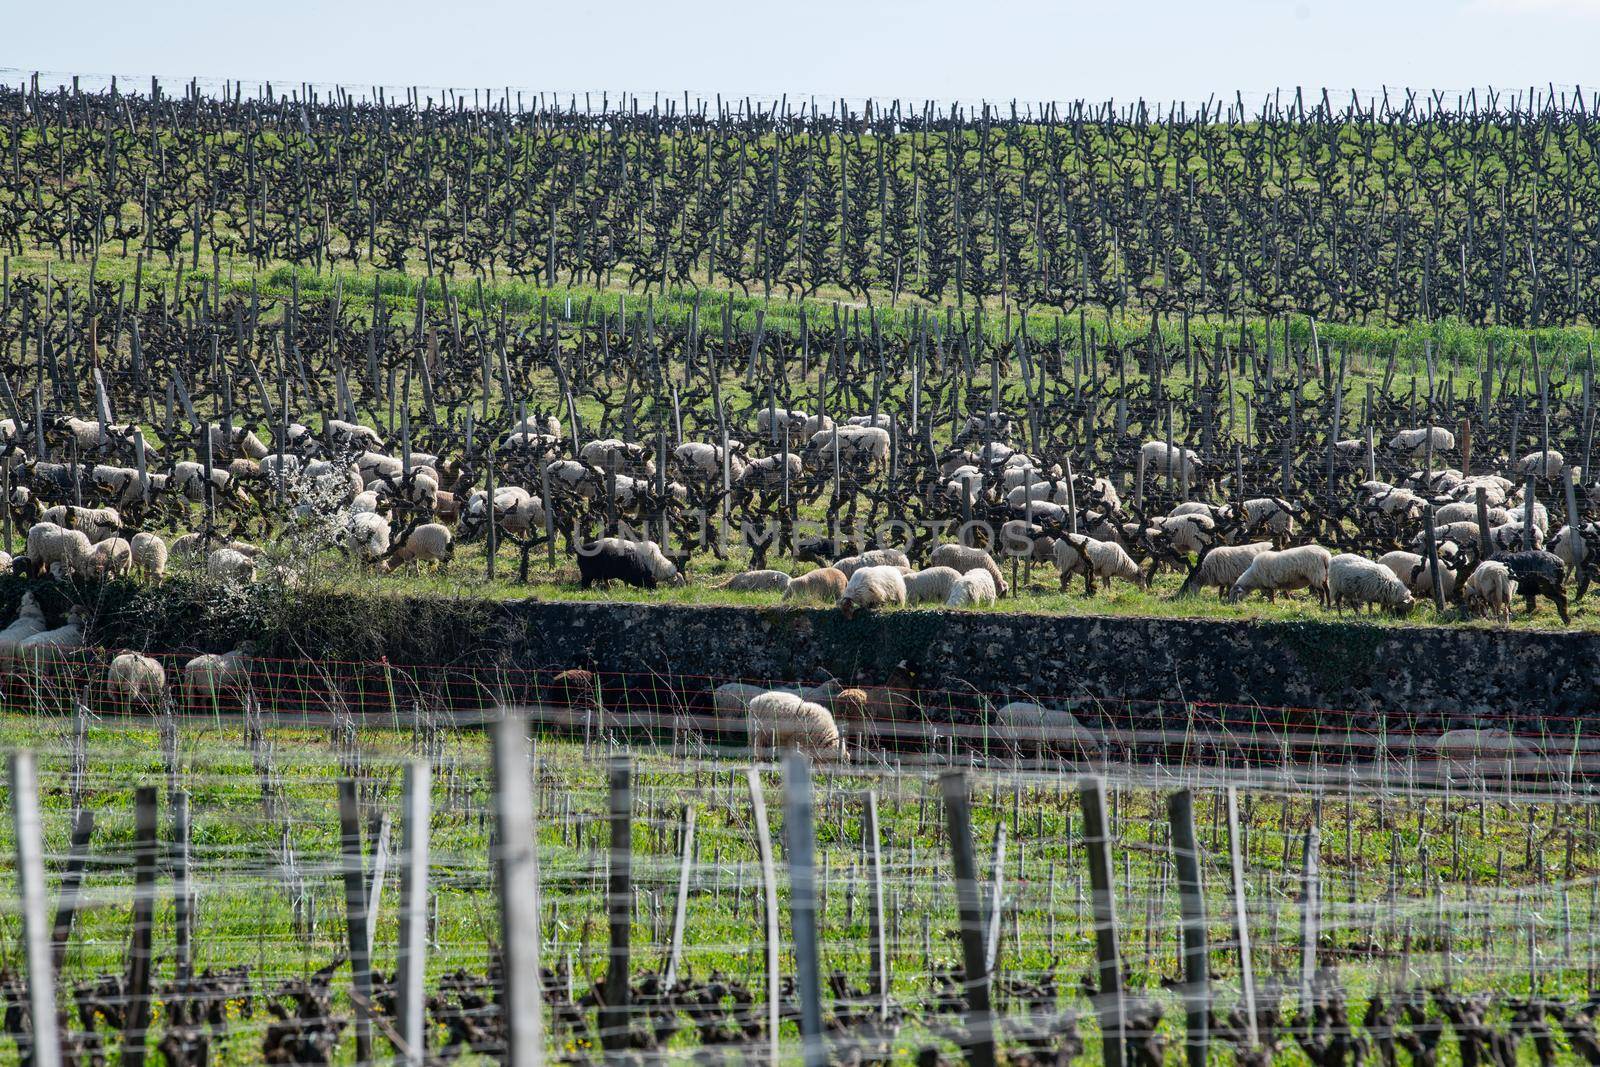 Domestic sheeps grazing in the Bordeaux vineyards, Sauternes, France by FreeProd